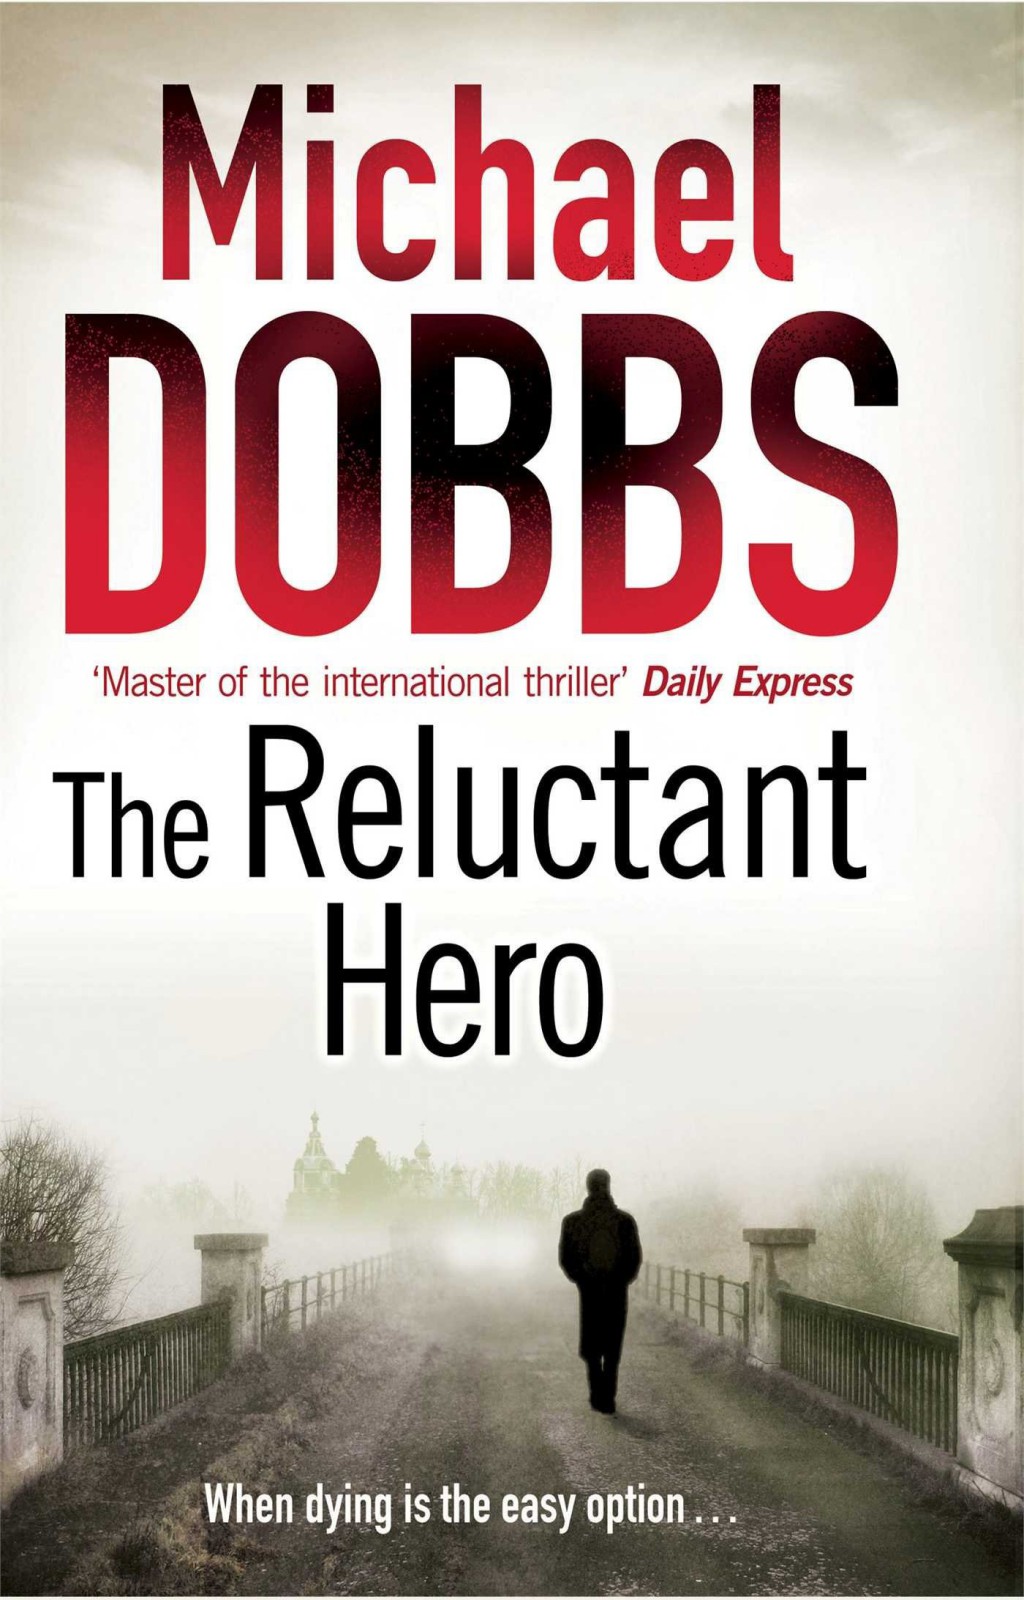 The Reluctant Hero by Michael Dobbs